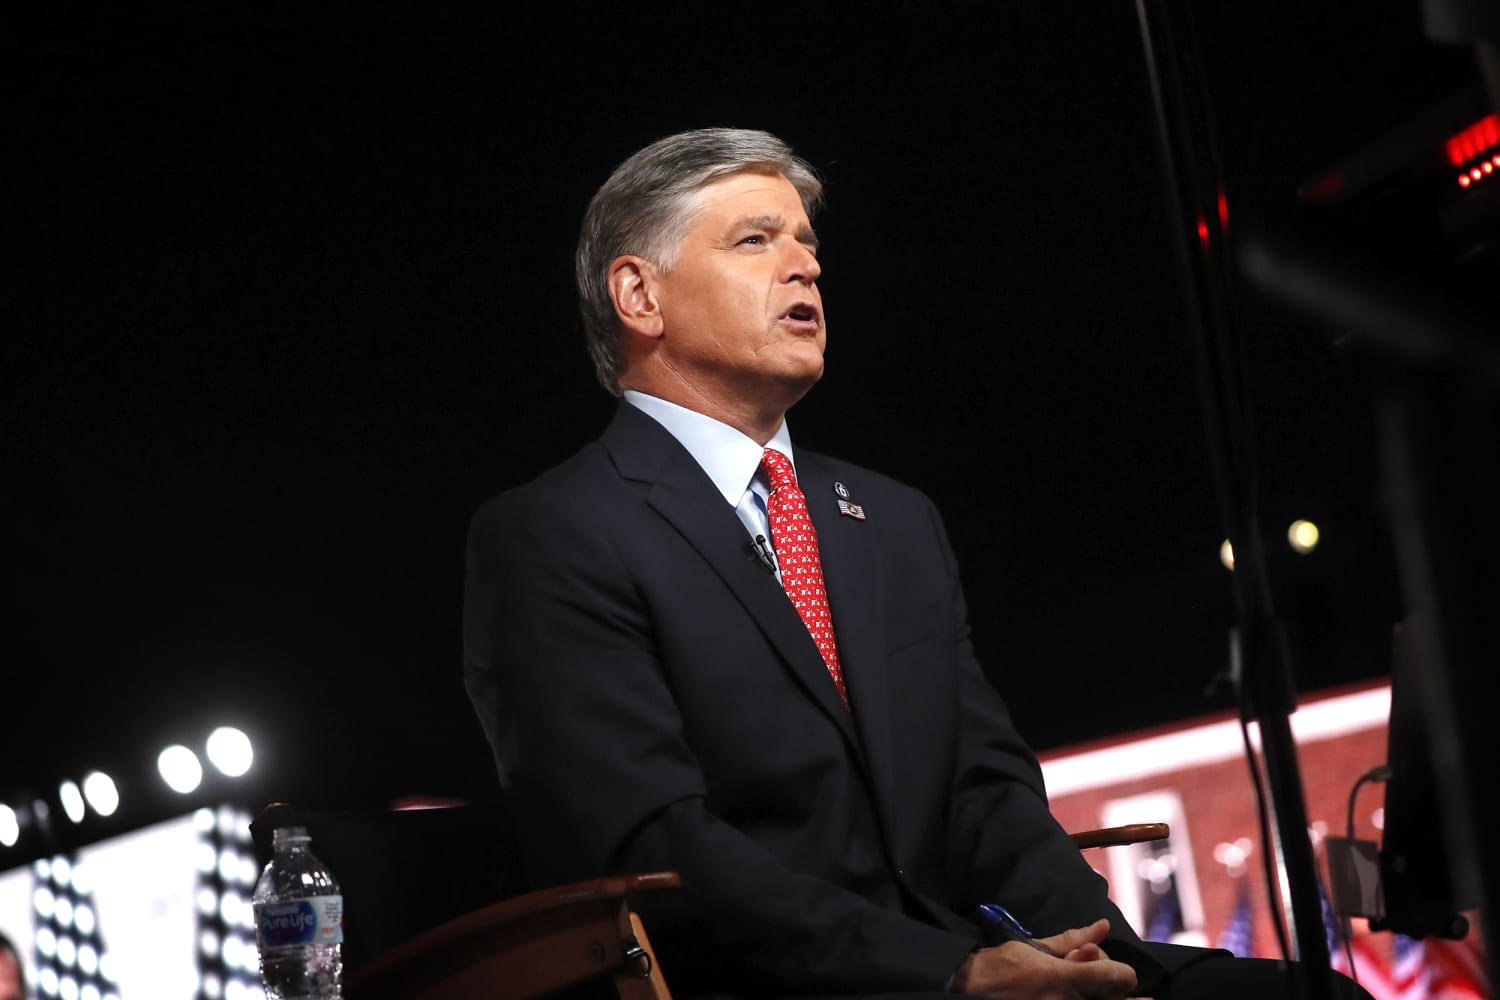 Jan. 6 committee asks Fox News host Sean Hannity to cooperate with probe